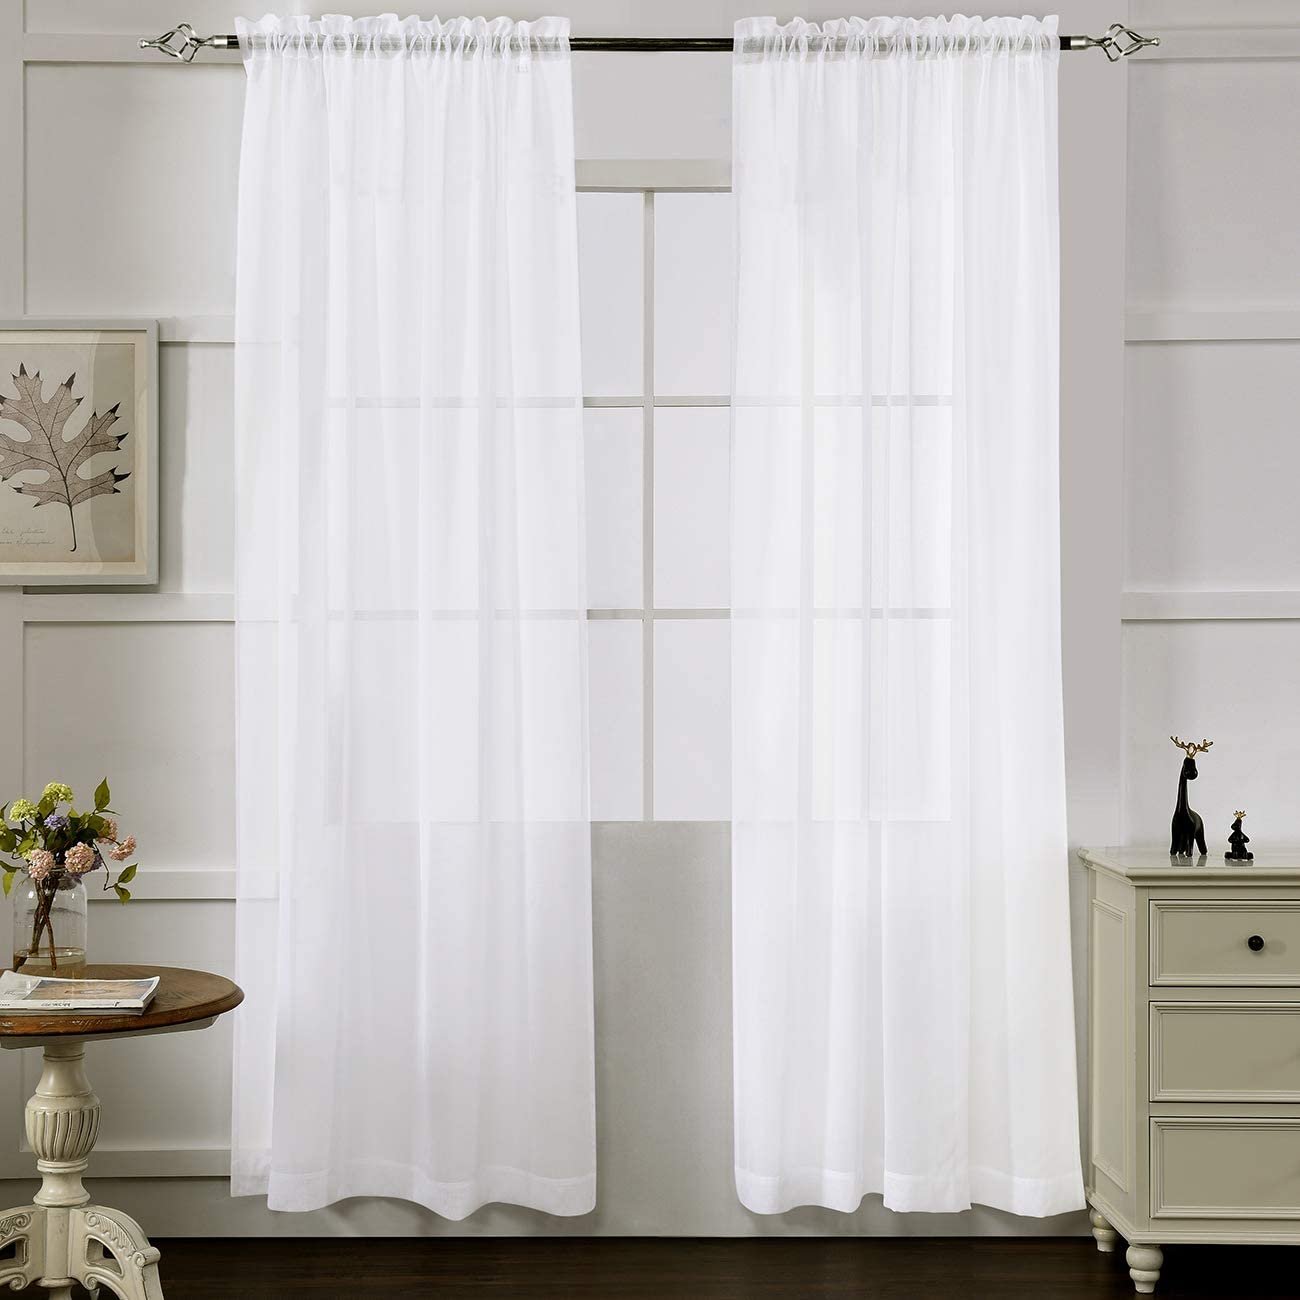 MYSTIC-HOME Minimalist Polyester Voile Sheer Curtains, 2-Pack